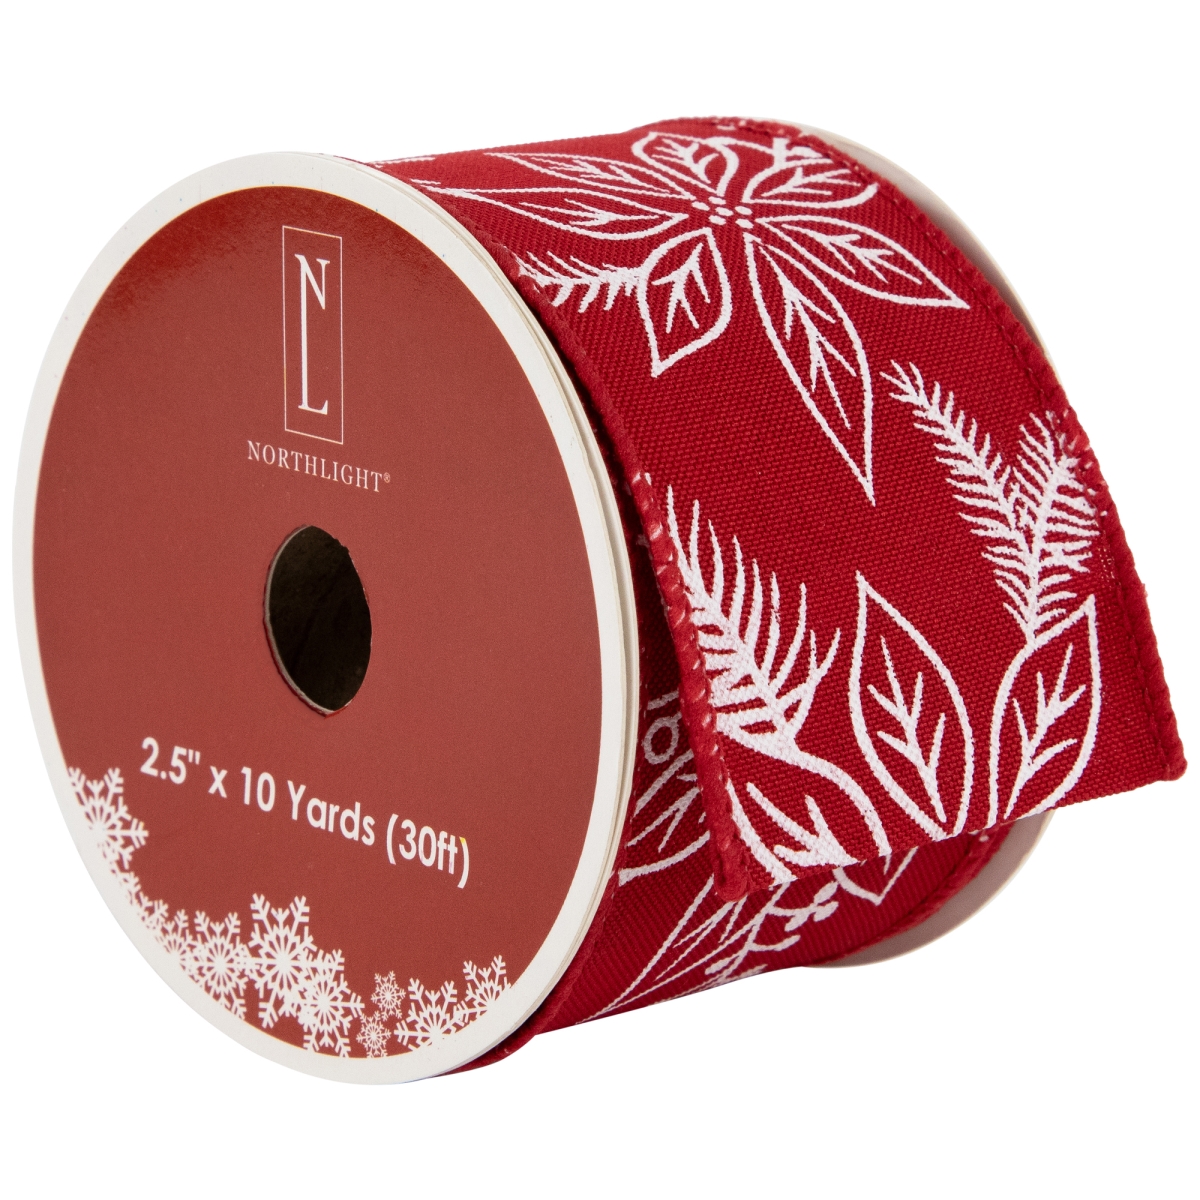 Picture of Northlight 35681131 2.5 in. x 10 Yards Red & White Floral Print Wired Craft Christmas Ribbon